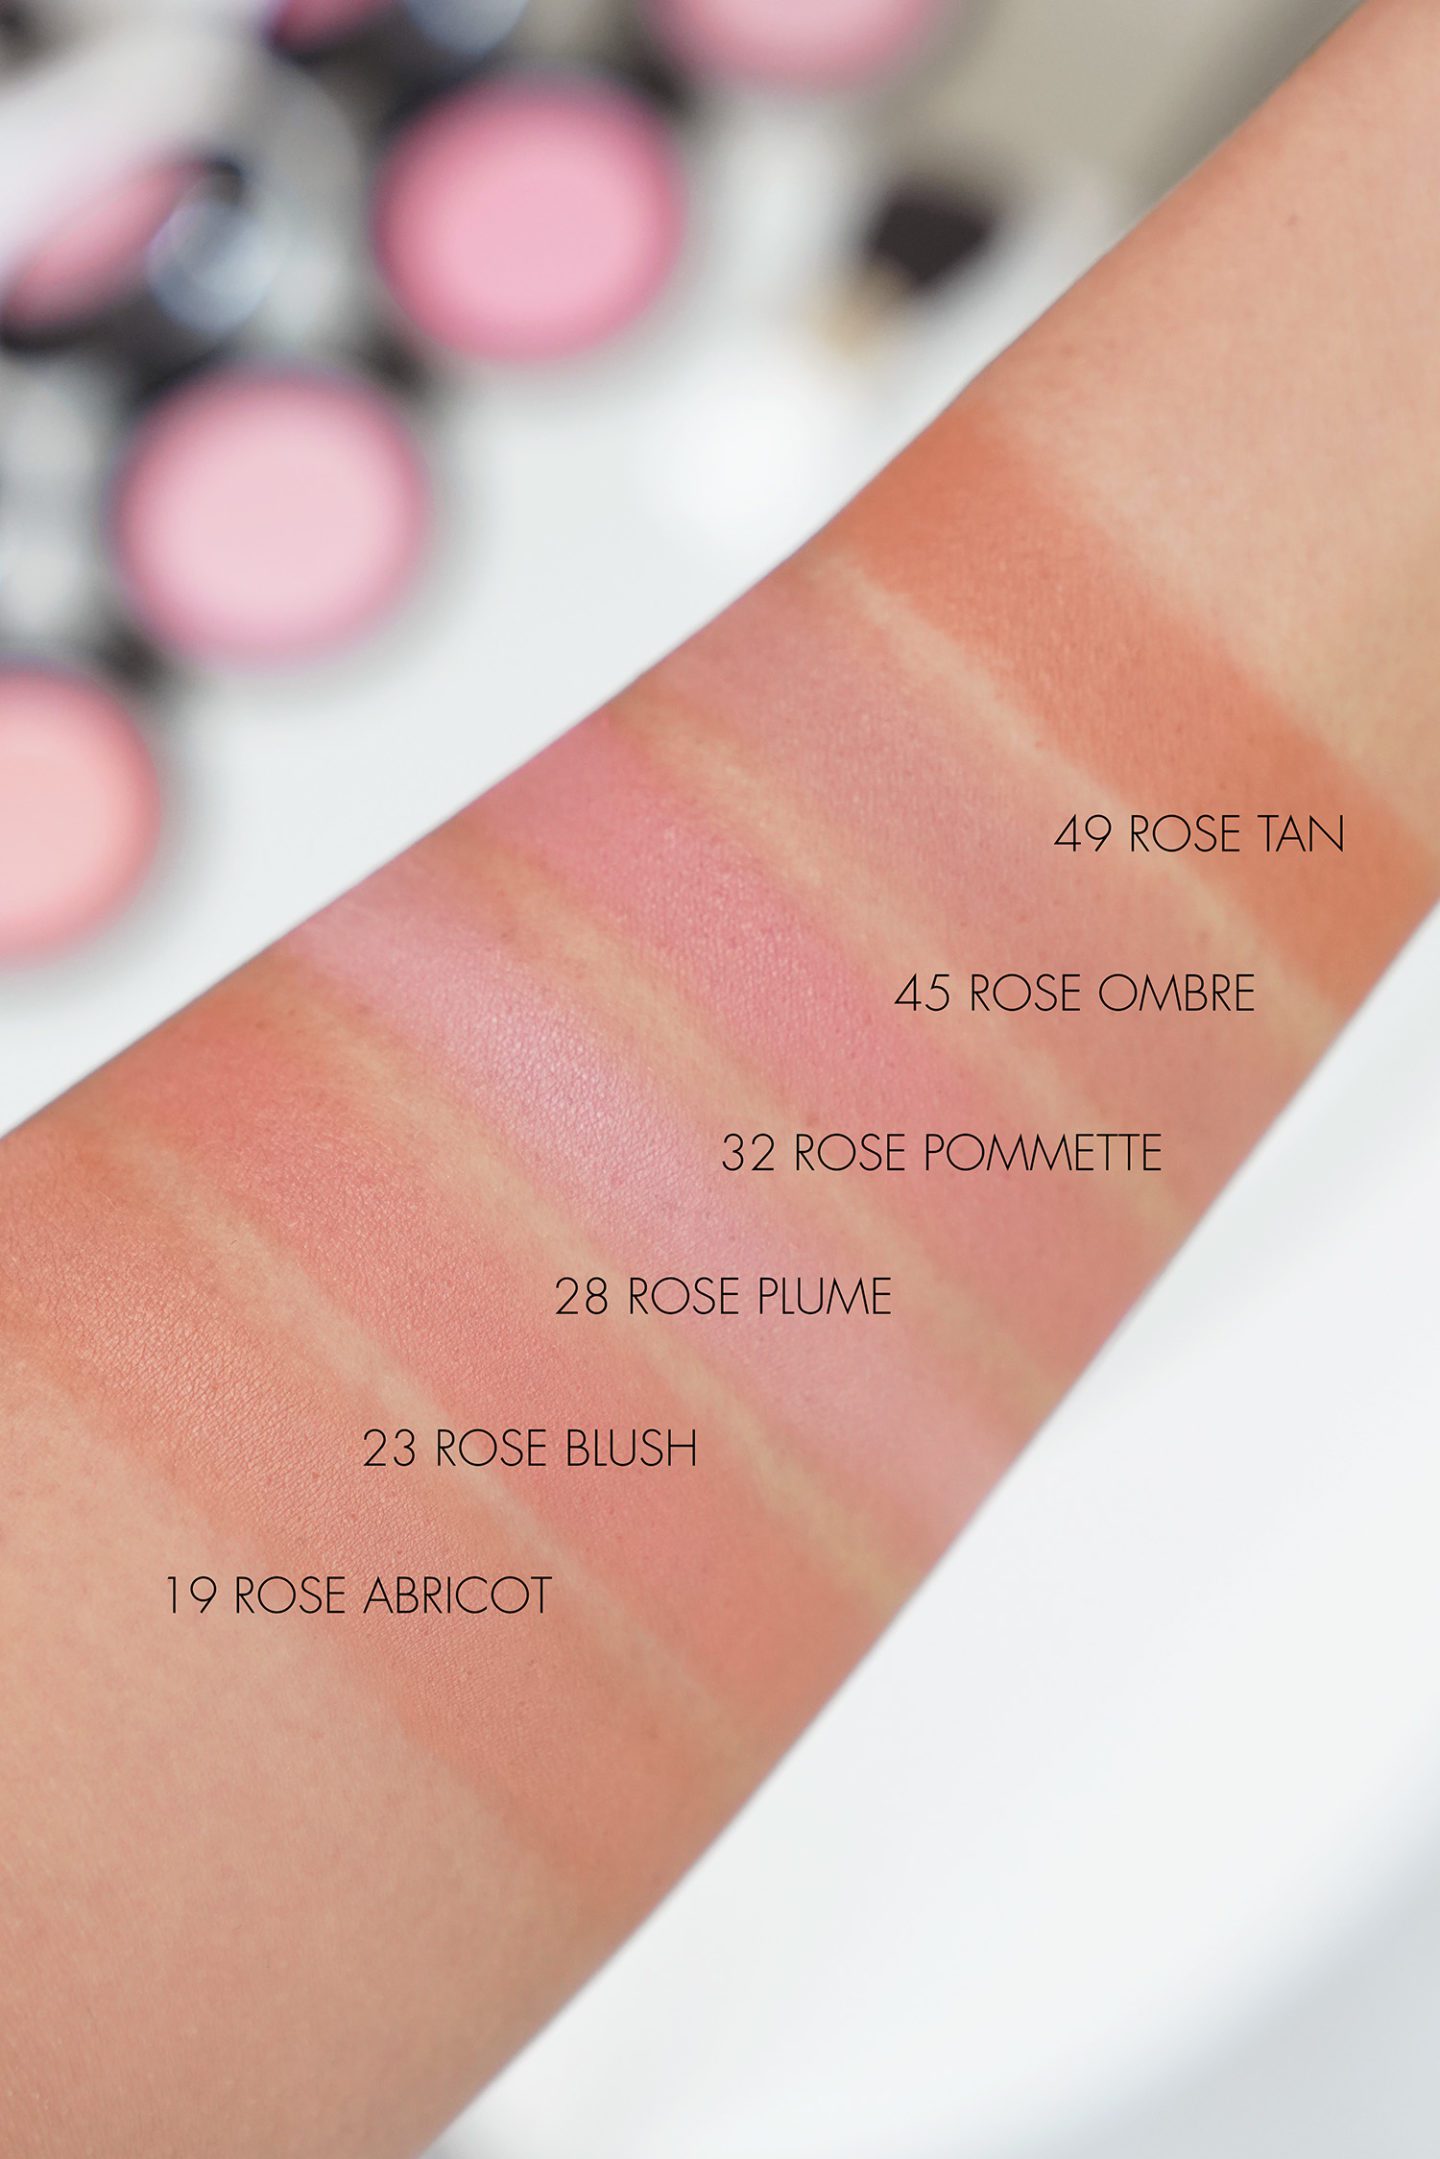 Rose Hermes Silky Blush Powder swatches via The Beauty Lookbook